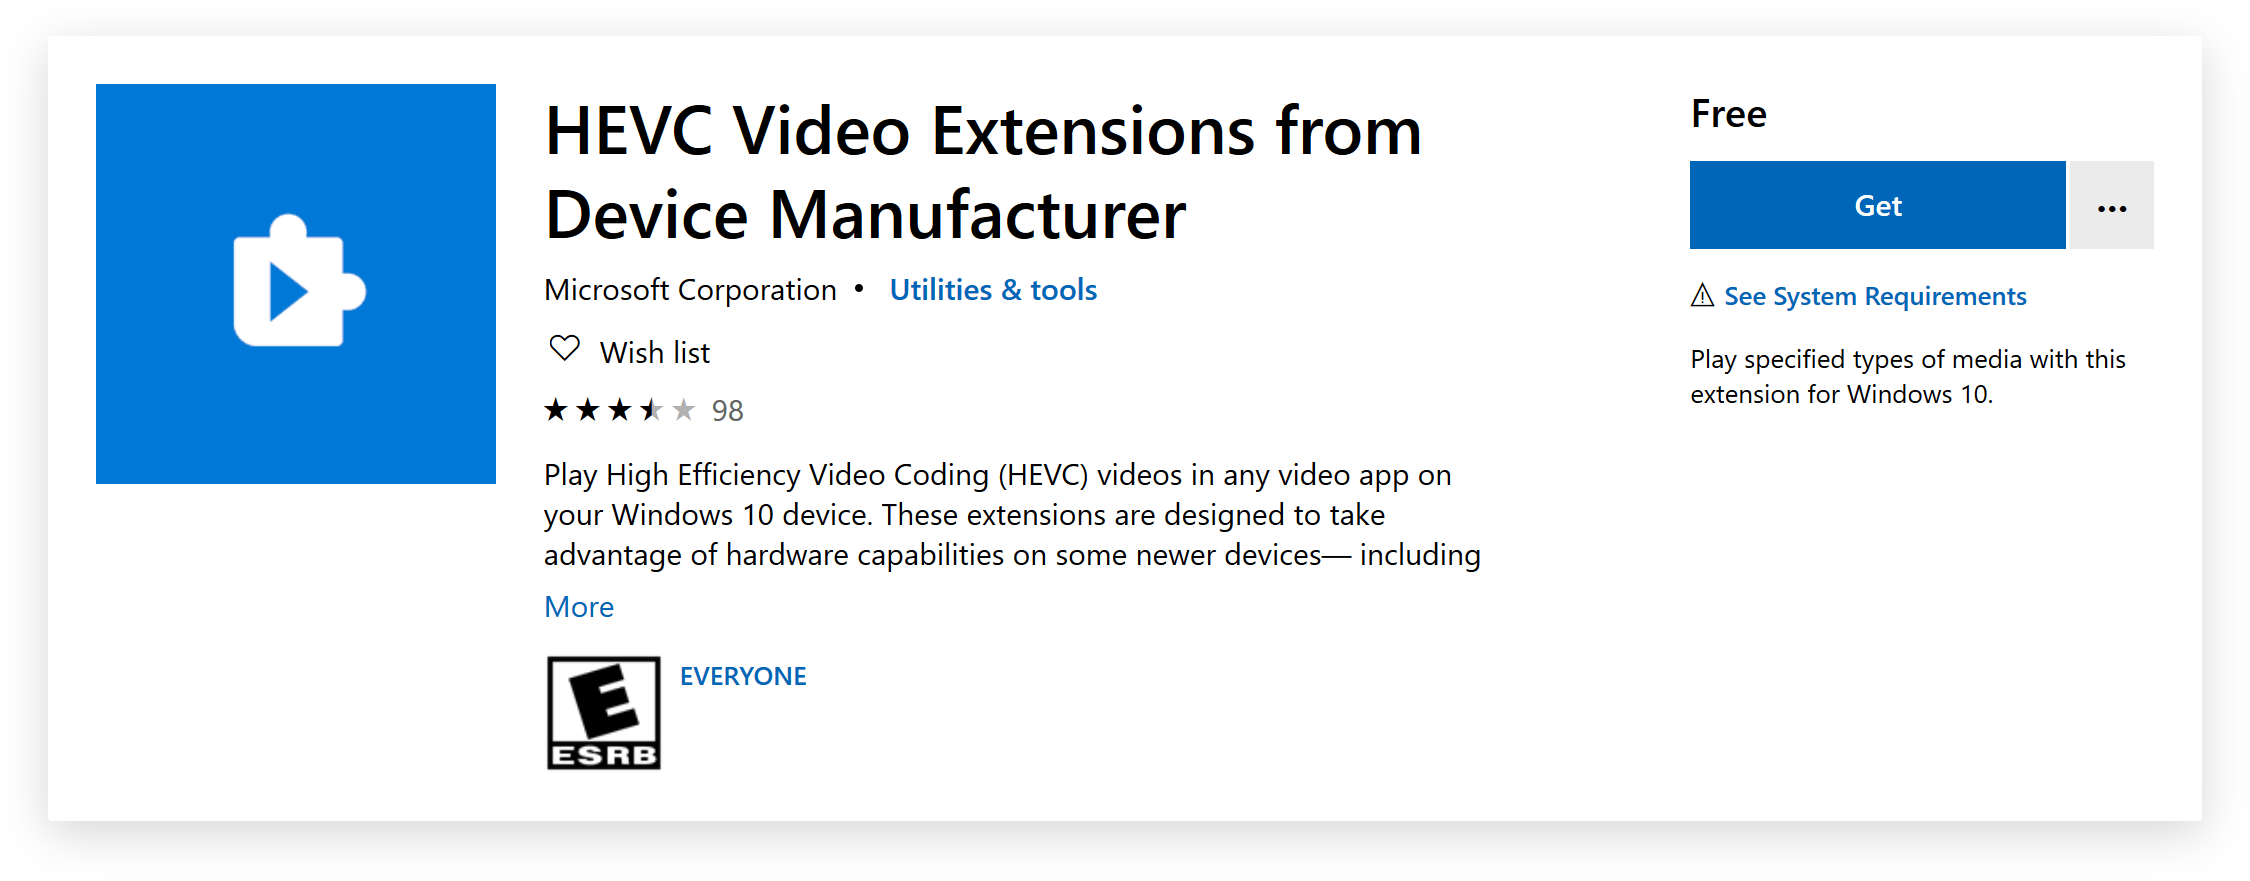 hevc video extensions free download for windows 10